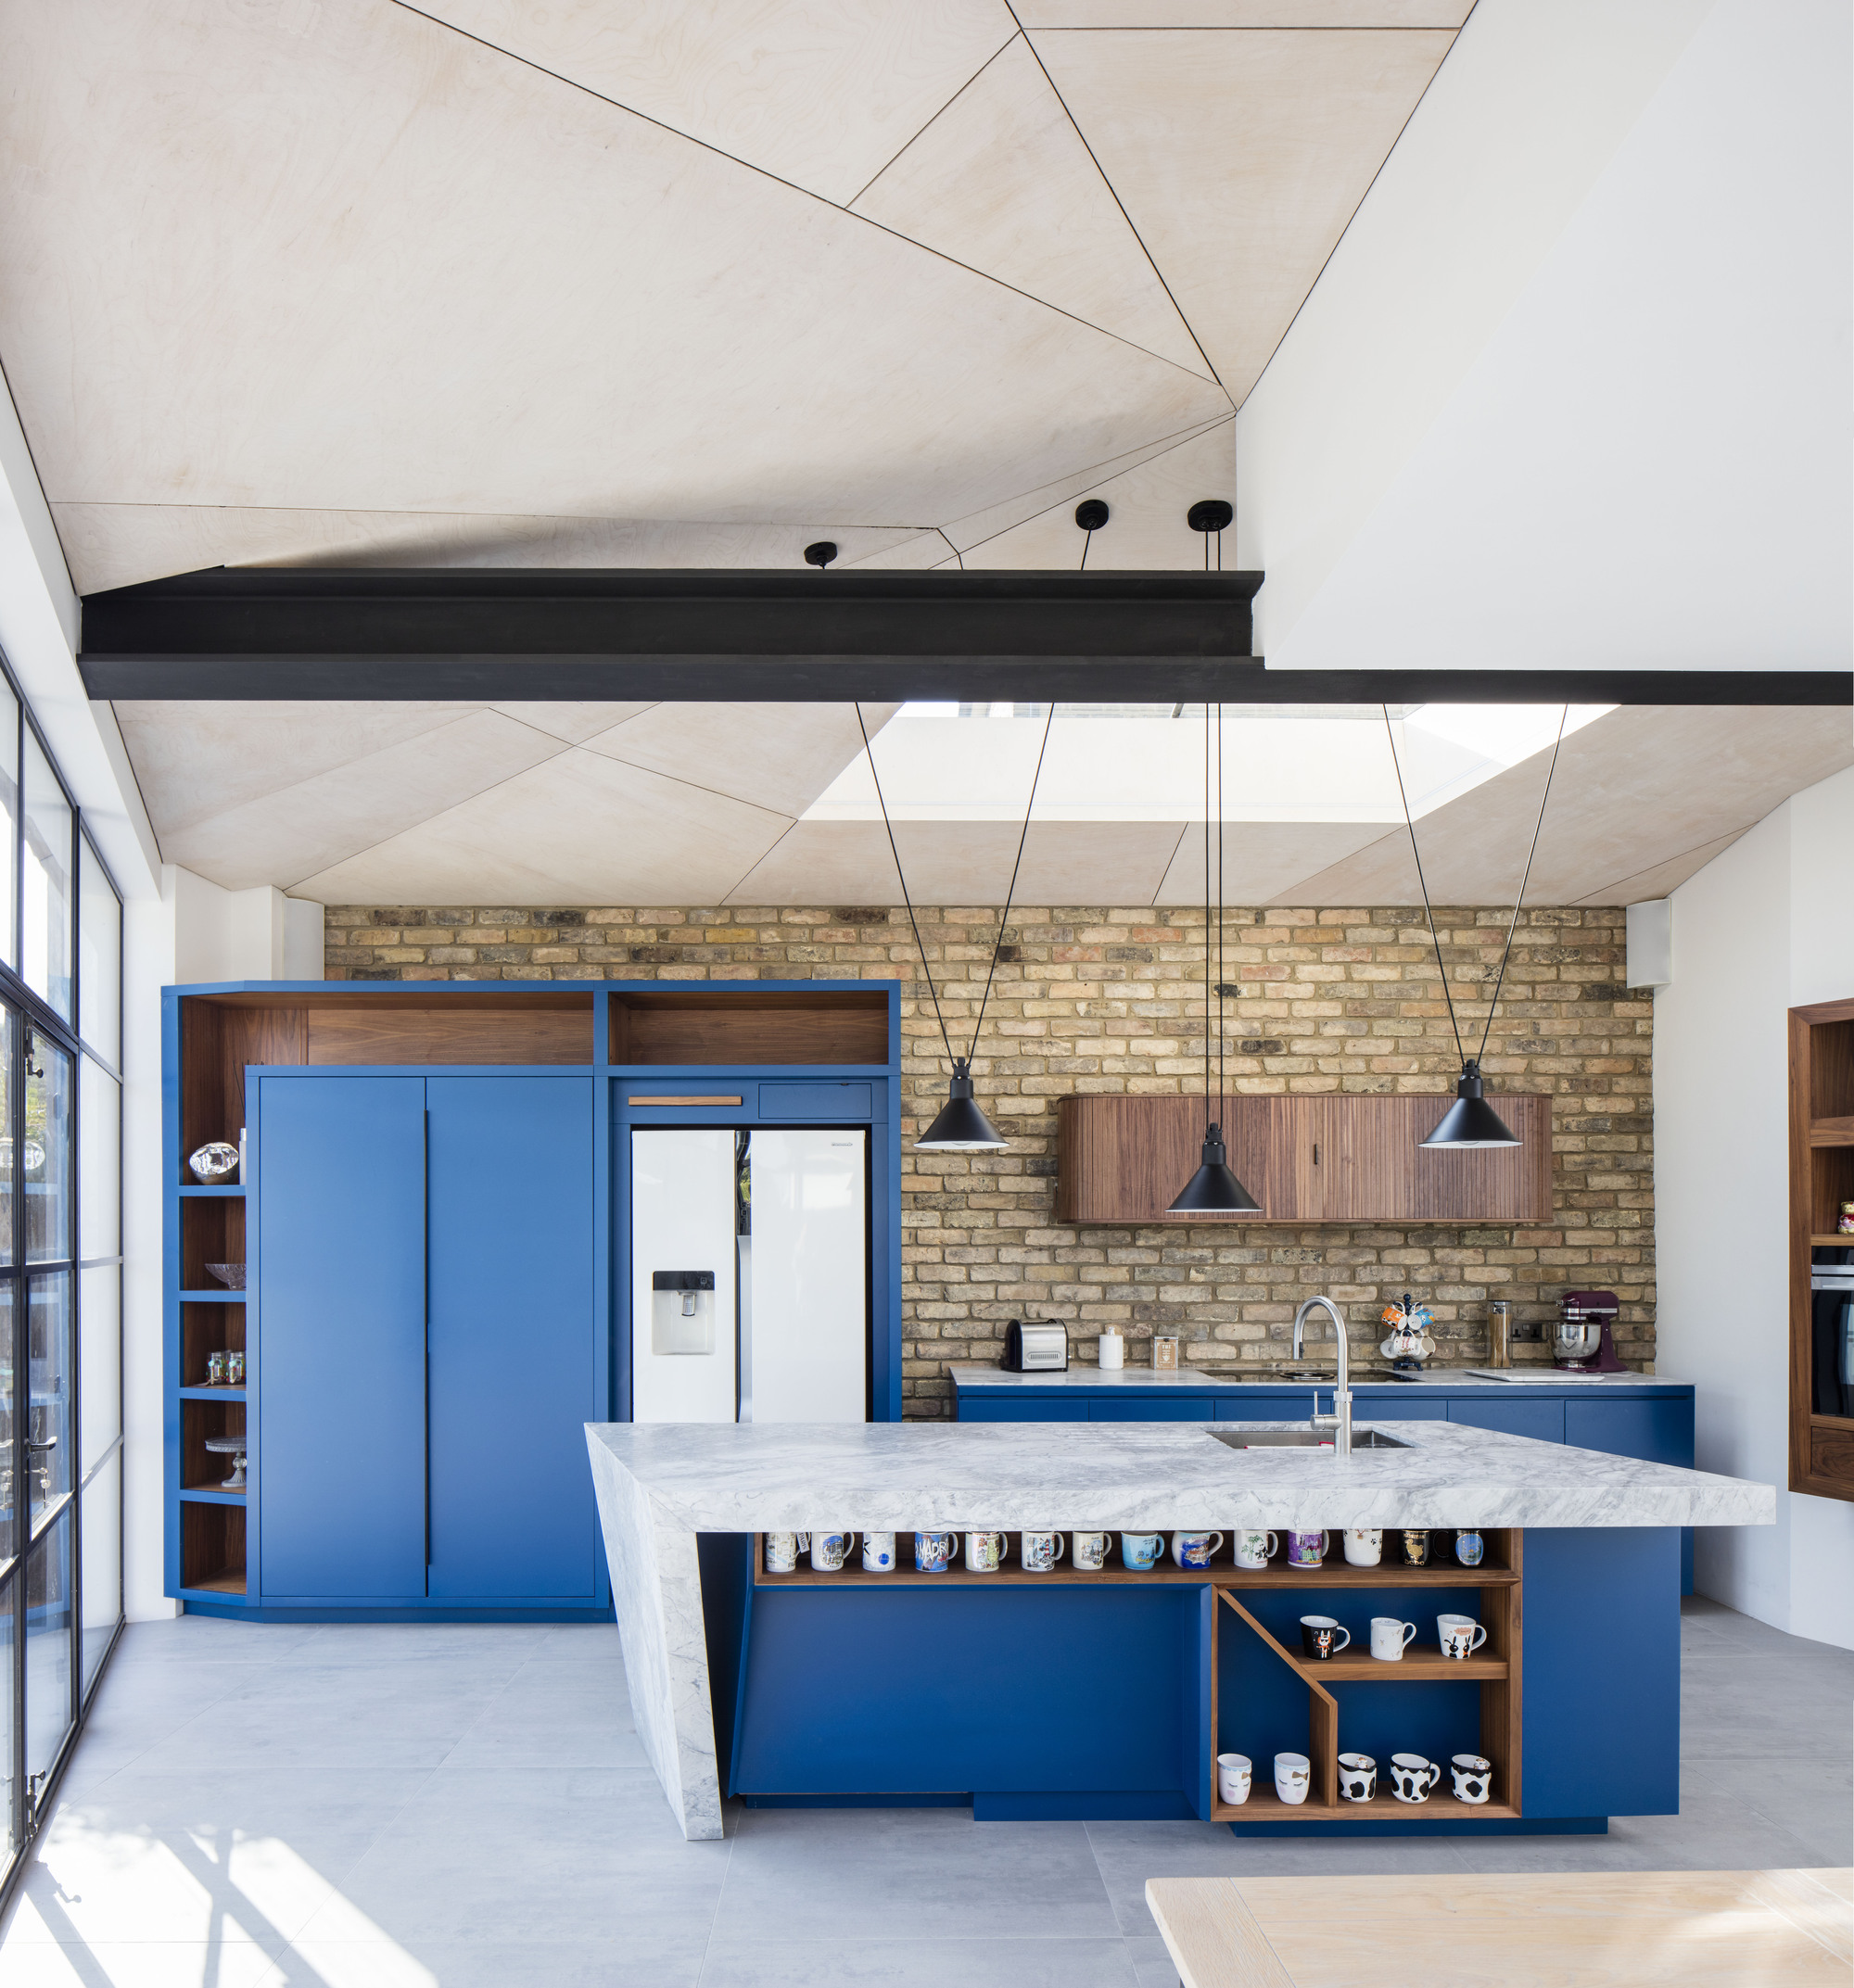 New kitchen of renovated family home in London with brick wall backdrop and blue cabinets